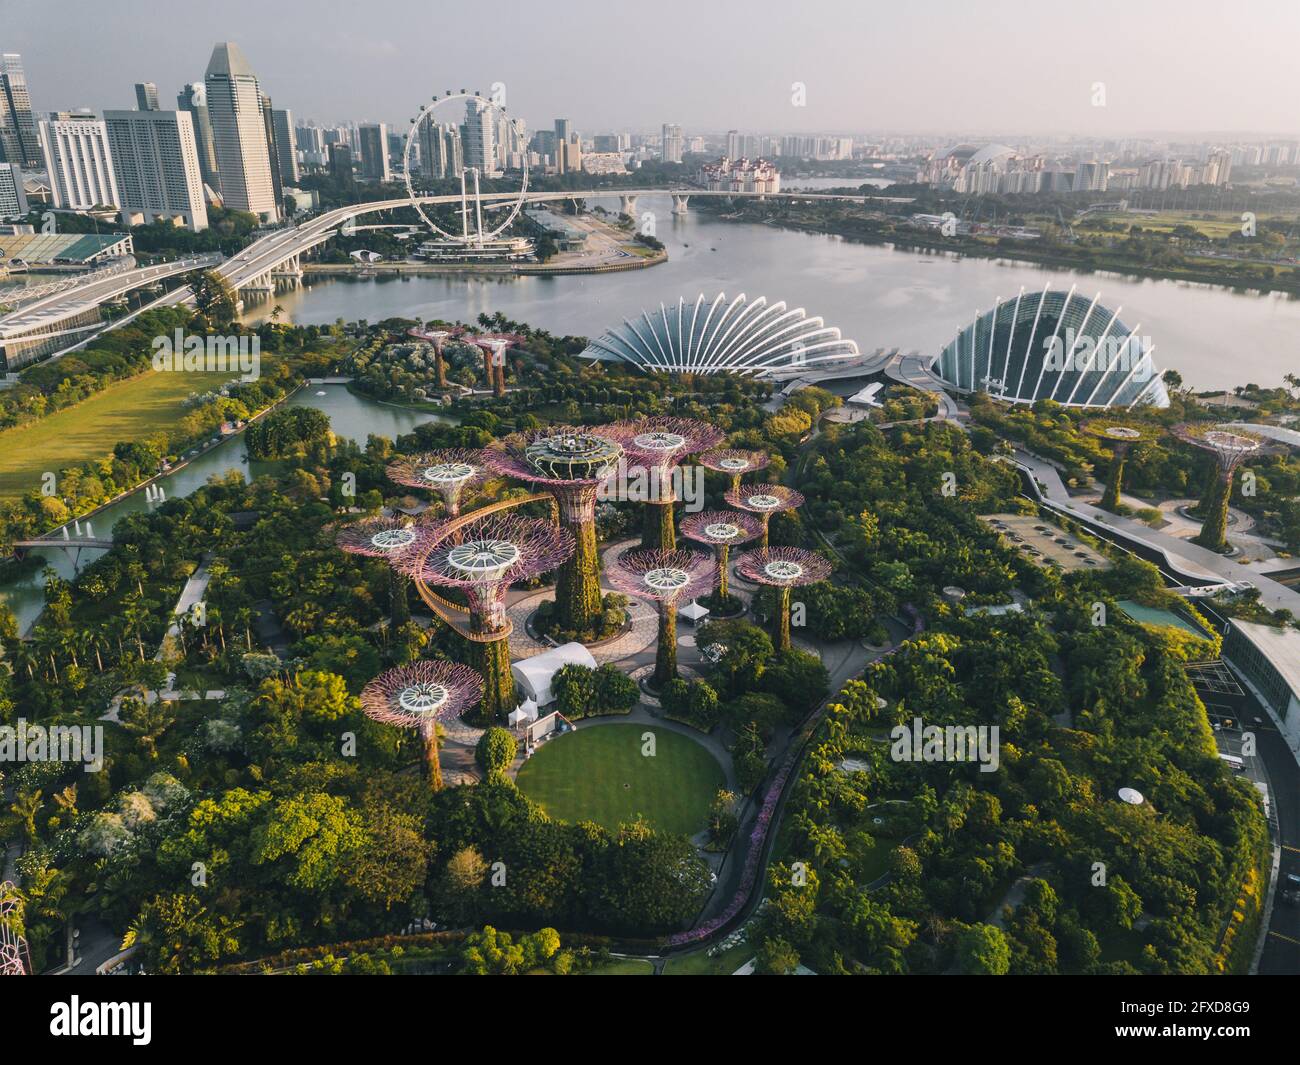 Aerial view of the Gardens by the Bay and Singapore’s sky line during sunrise light. Stock Photo